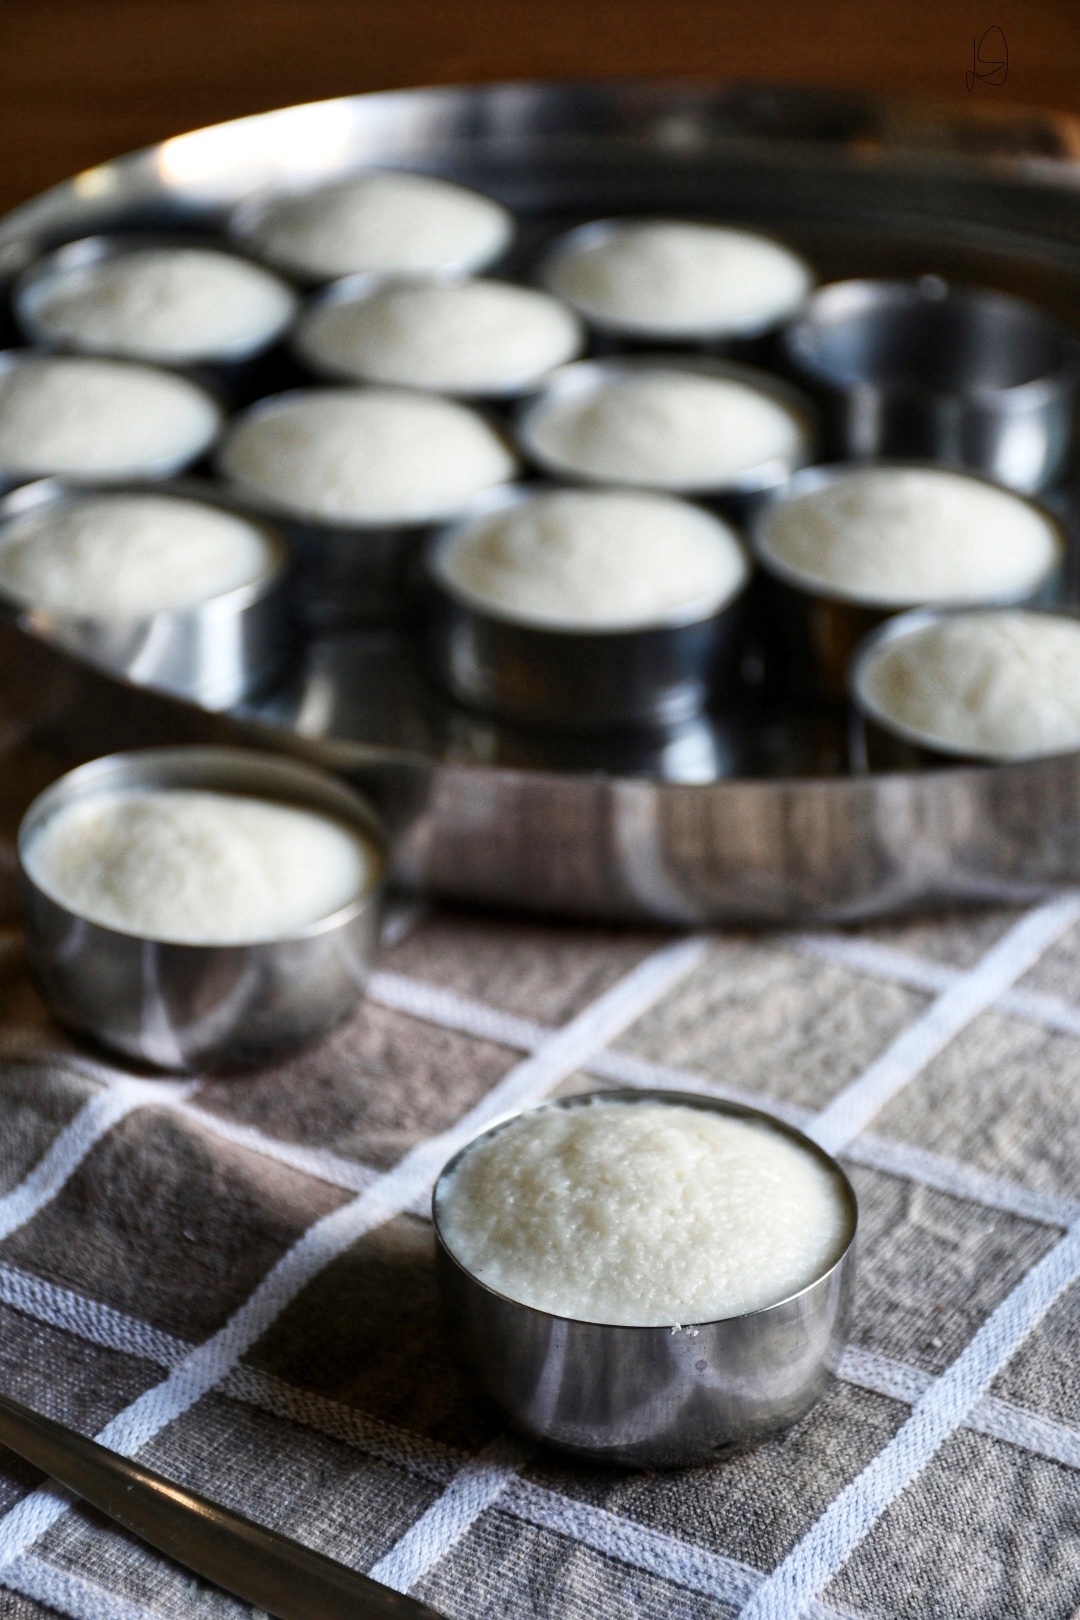 A tray of fluffy white idli are in individual steel containers on a beige and white checked tabelcloth.